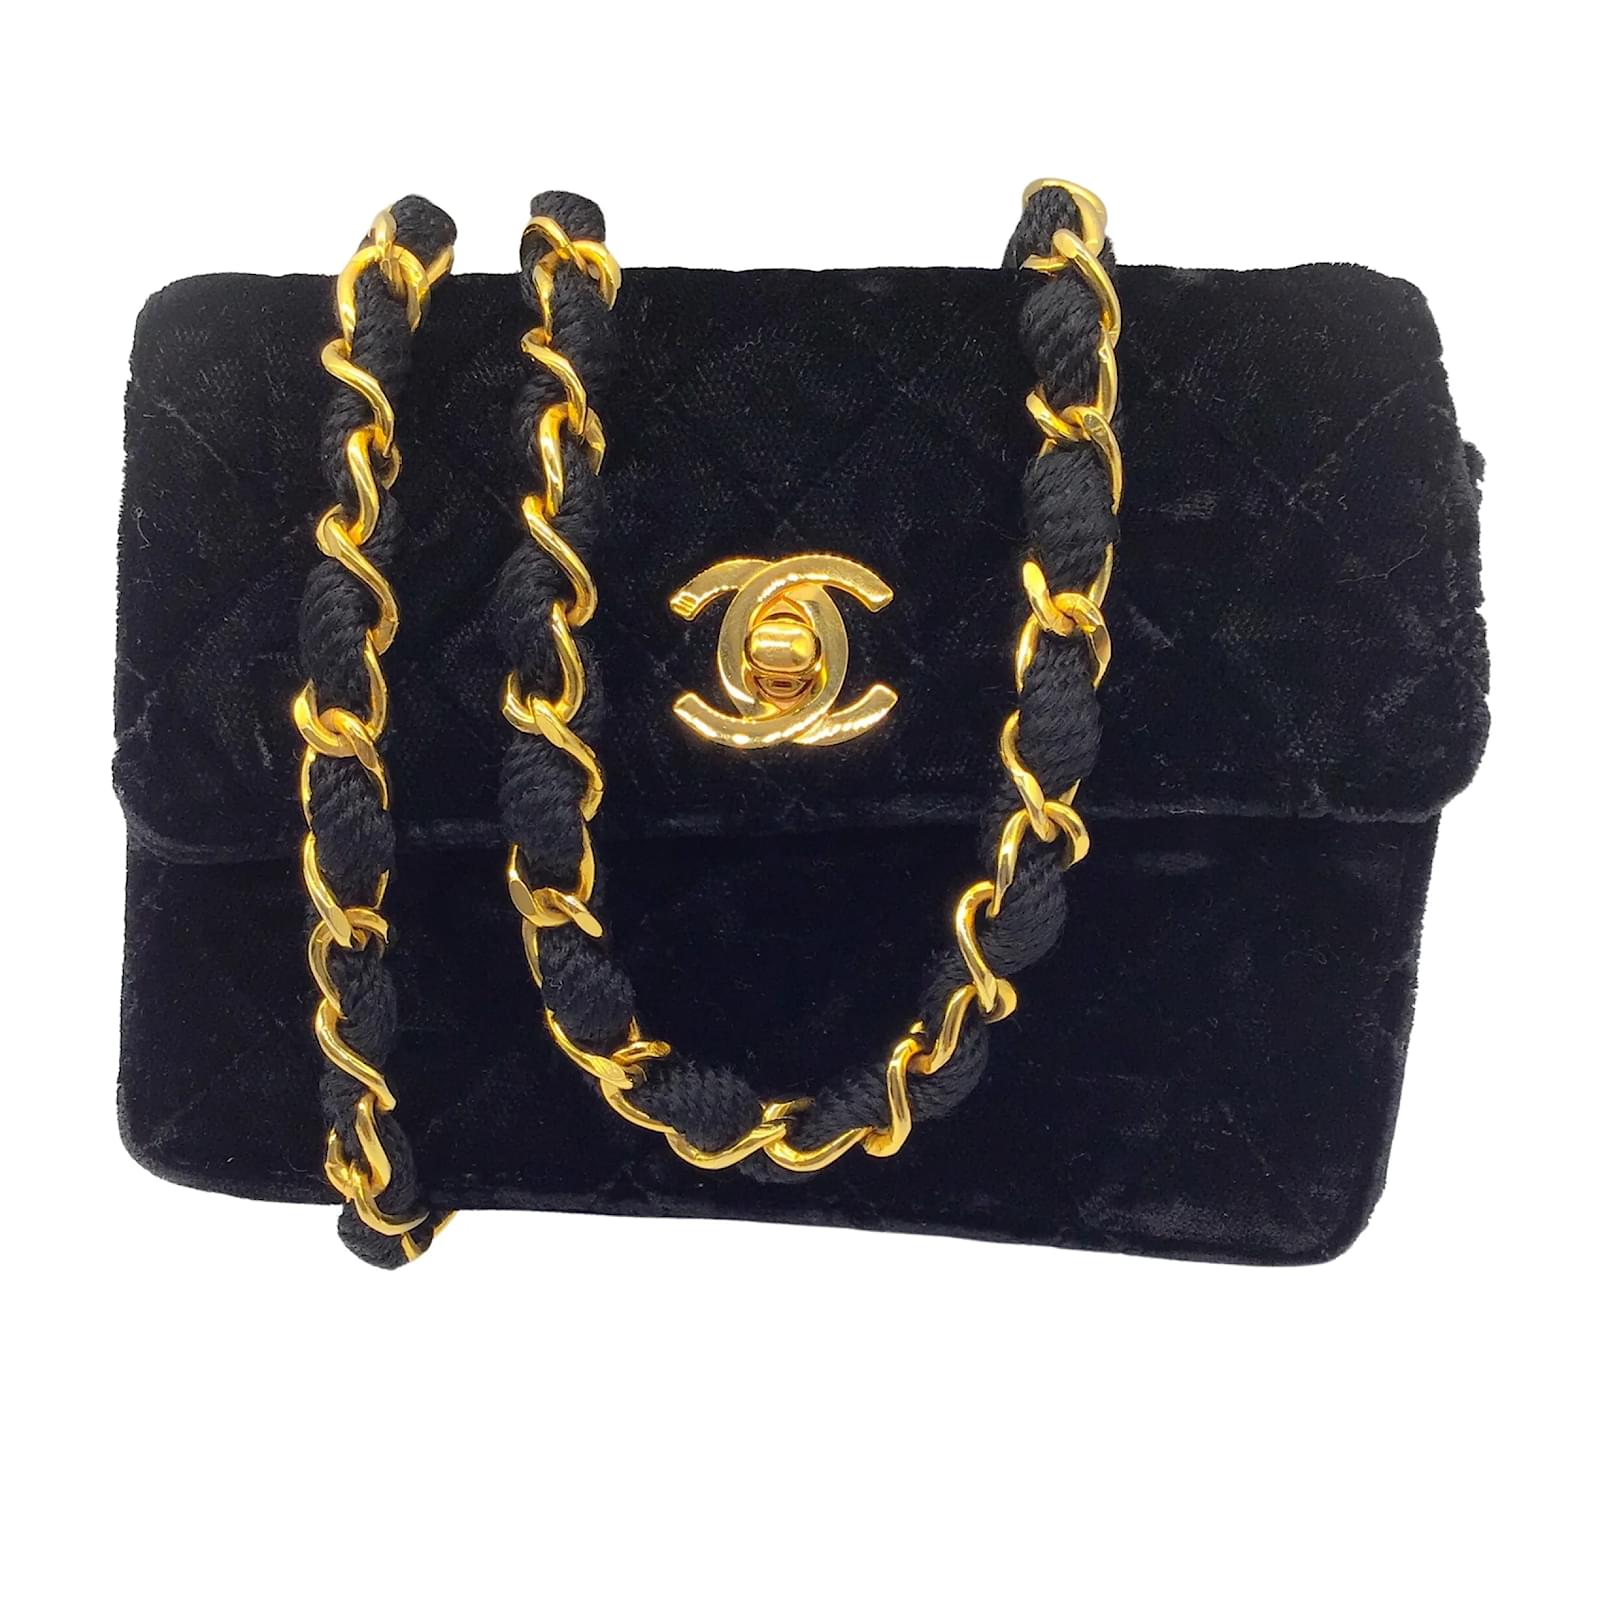 Chanel Vintage Oversized Black Matelasse Quilted Lambskin Leather